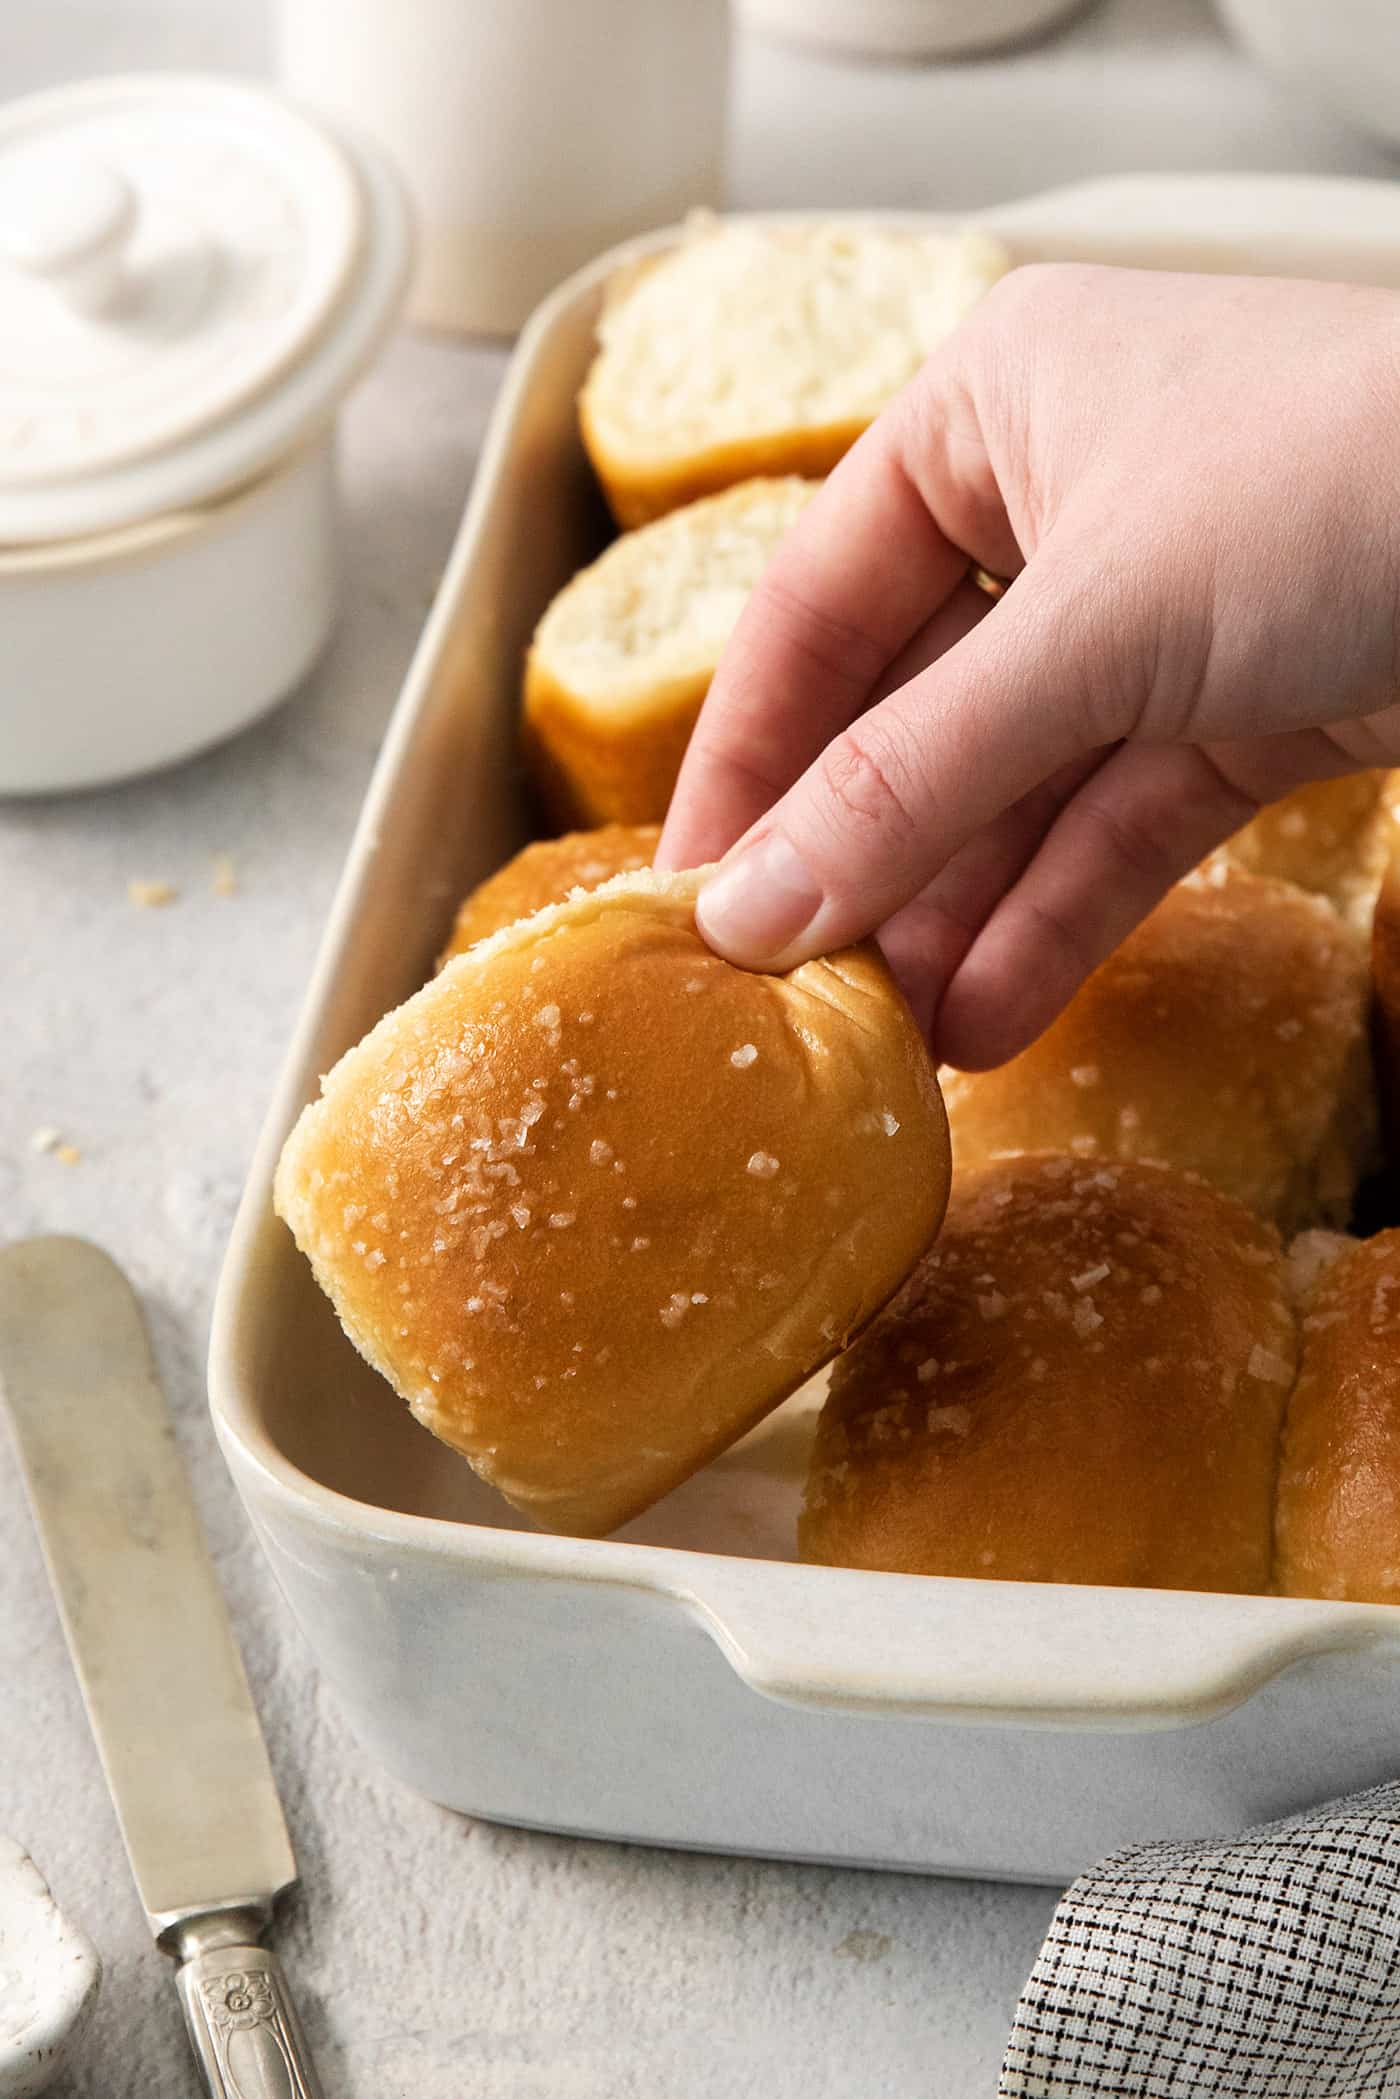 A hand lifts out a rhodes roll from a pan of rolls.